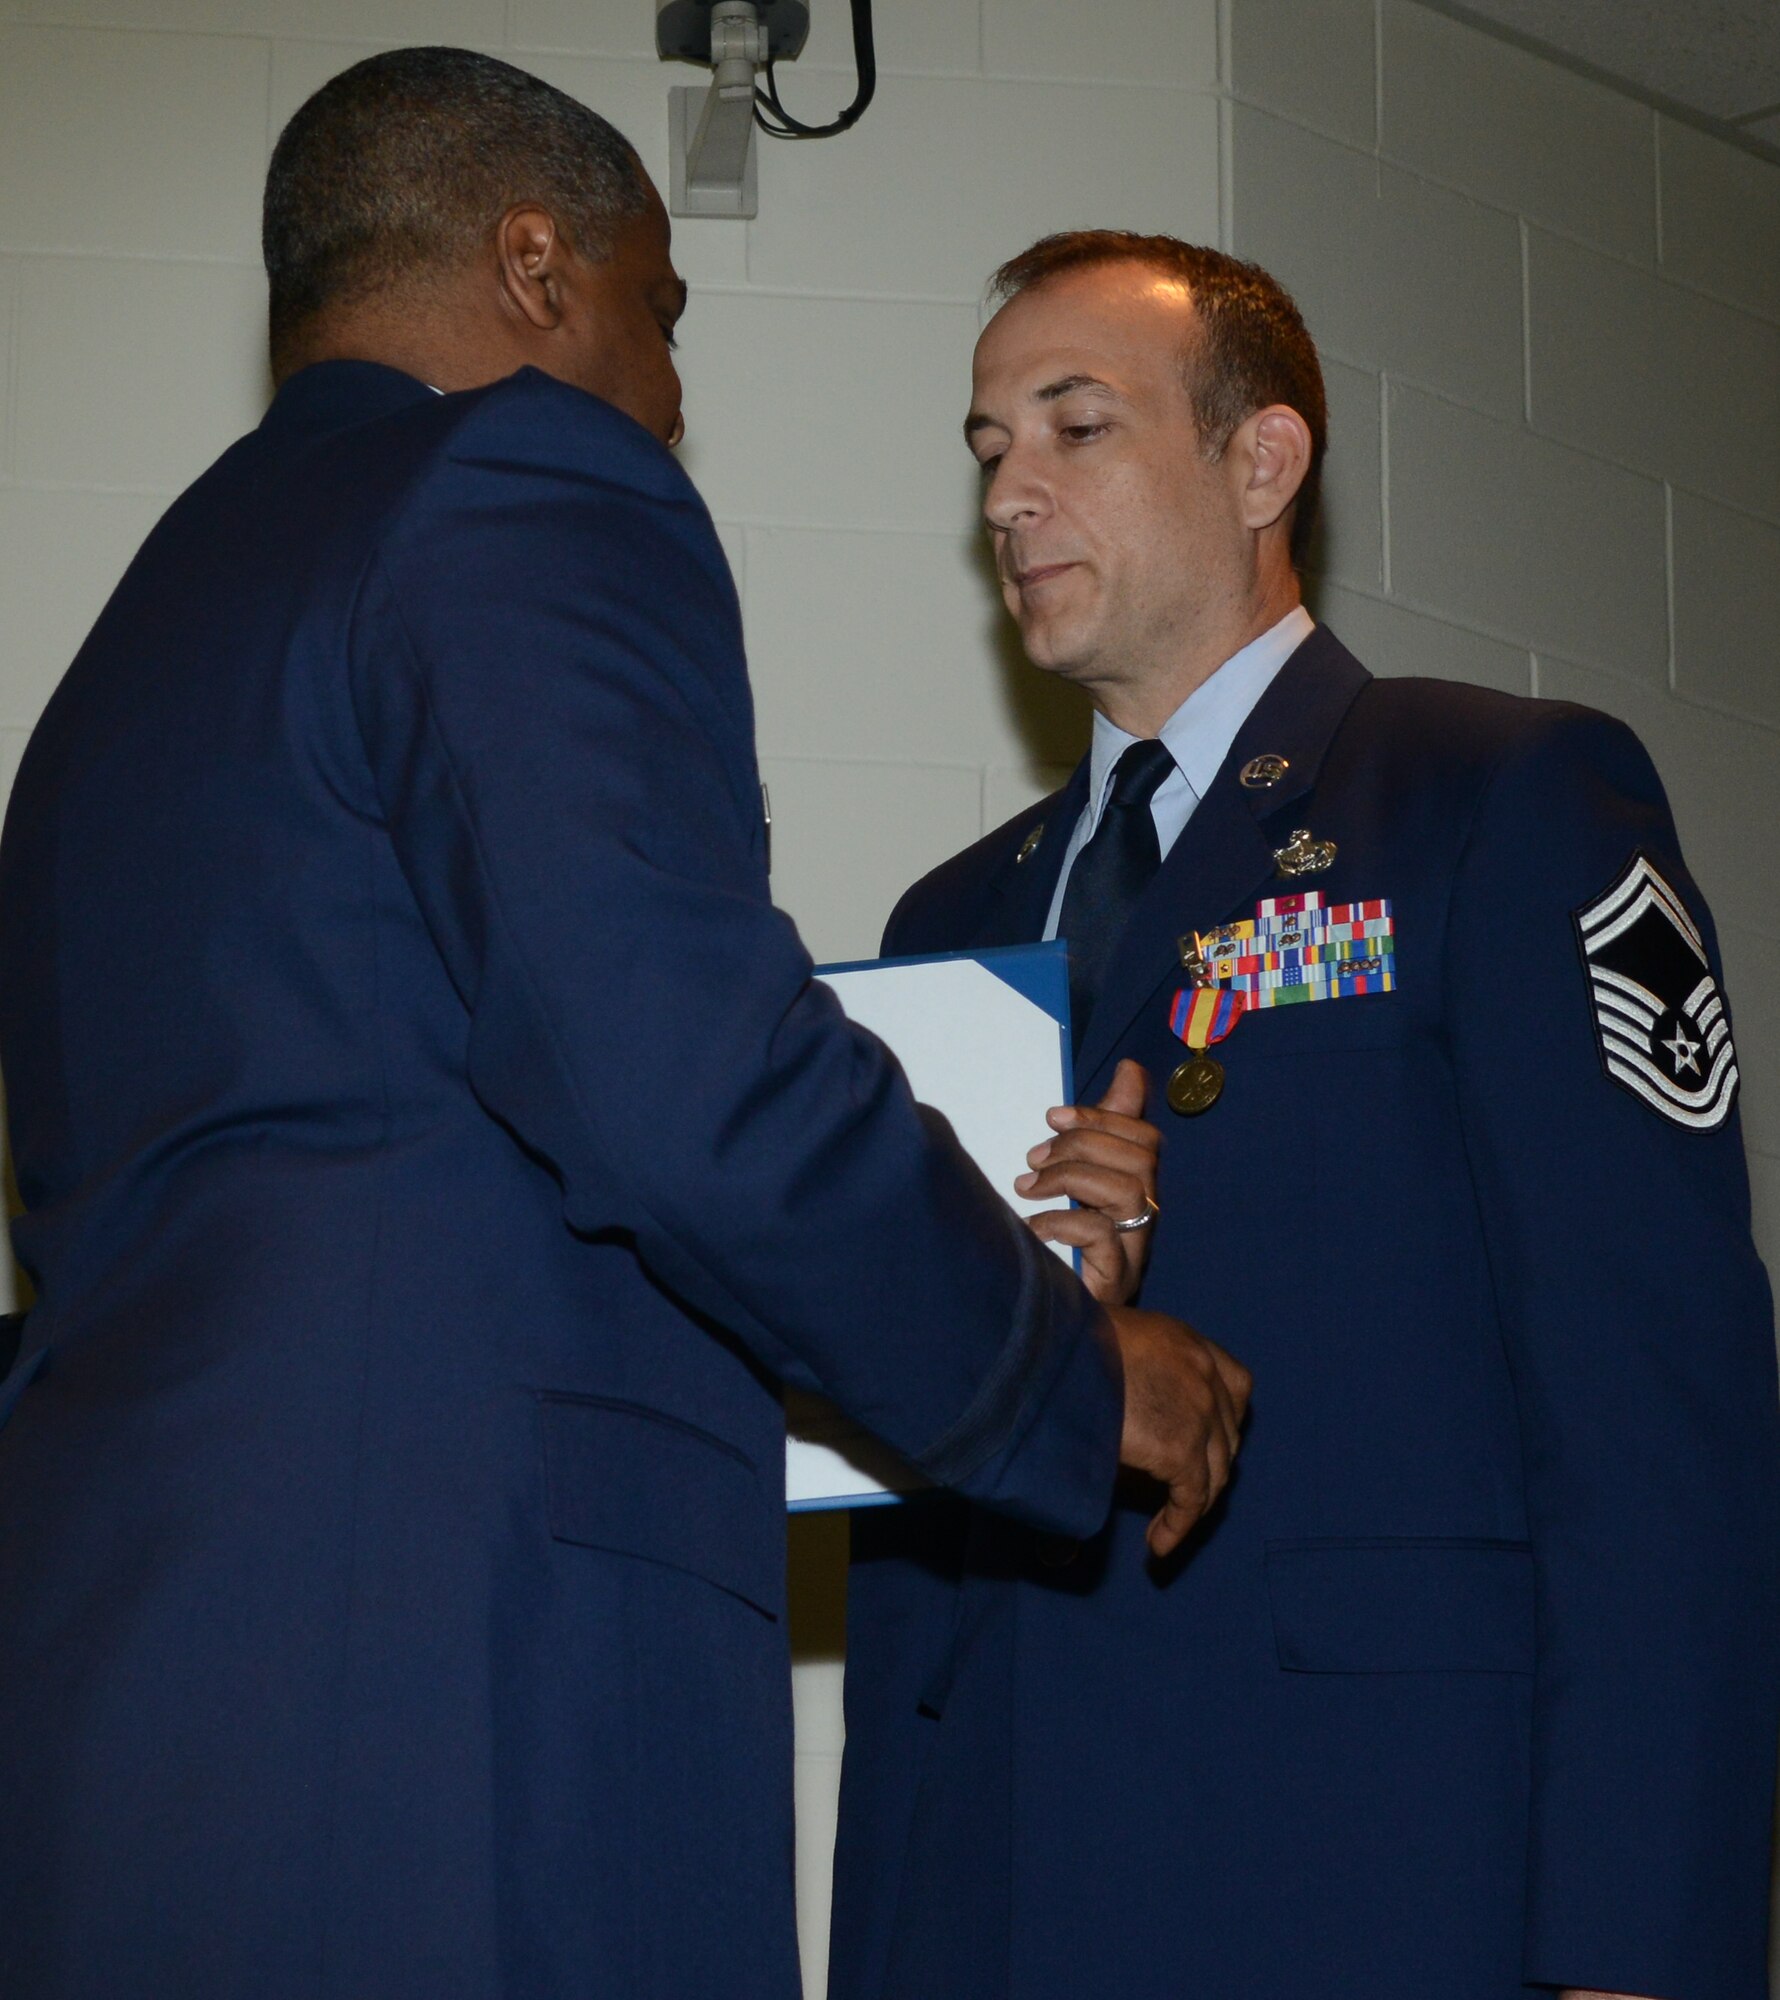 Brig. Gen. Brian Newby, chief of staff for the Texas Air National Guard pins the Texas Medal of Merit on Senior Mater Sgt. Edward Walden, 136th Airlift Wing Senior Non-Commissioned Officer of th Year for his outstanding performance in the Wing. Walden competed amongst fellow SNCOs thoughout the State. (National Guard photo by Senior Master Sgt. Elizabeth Gilbert)